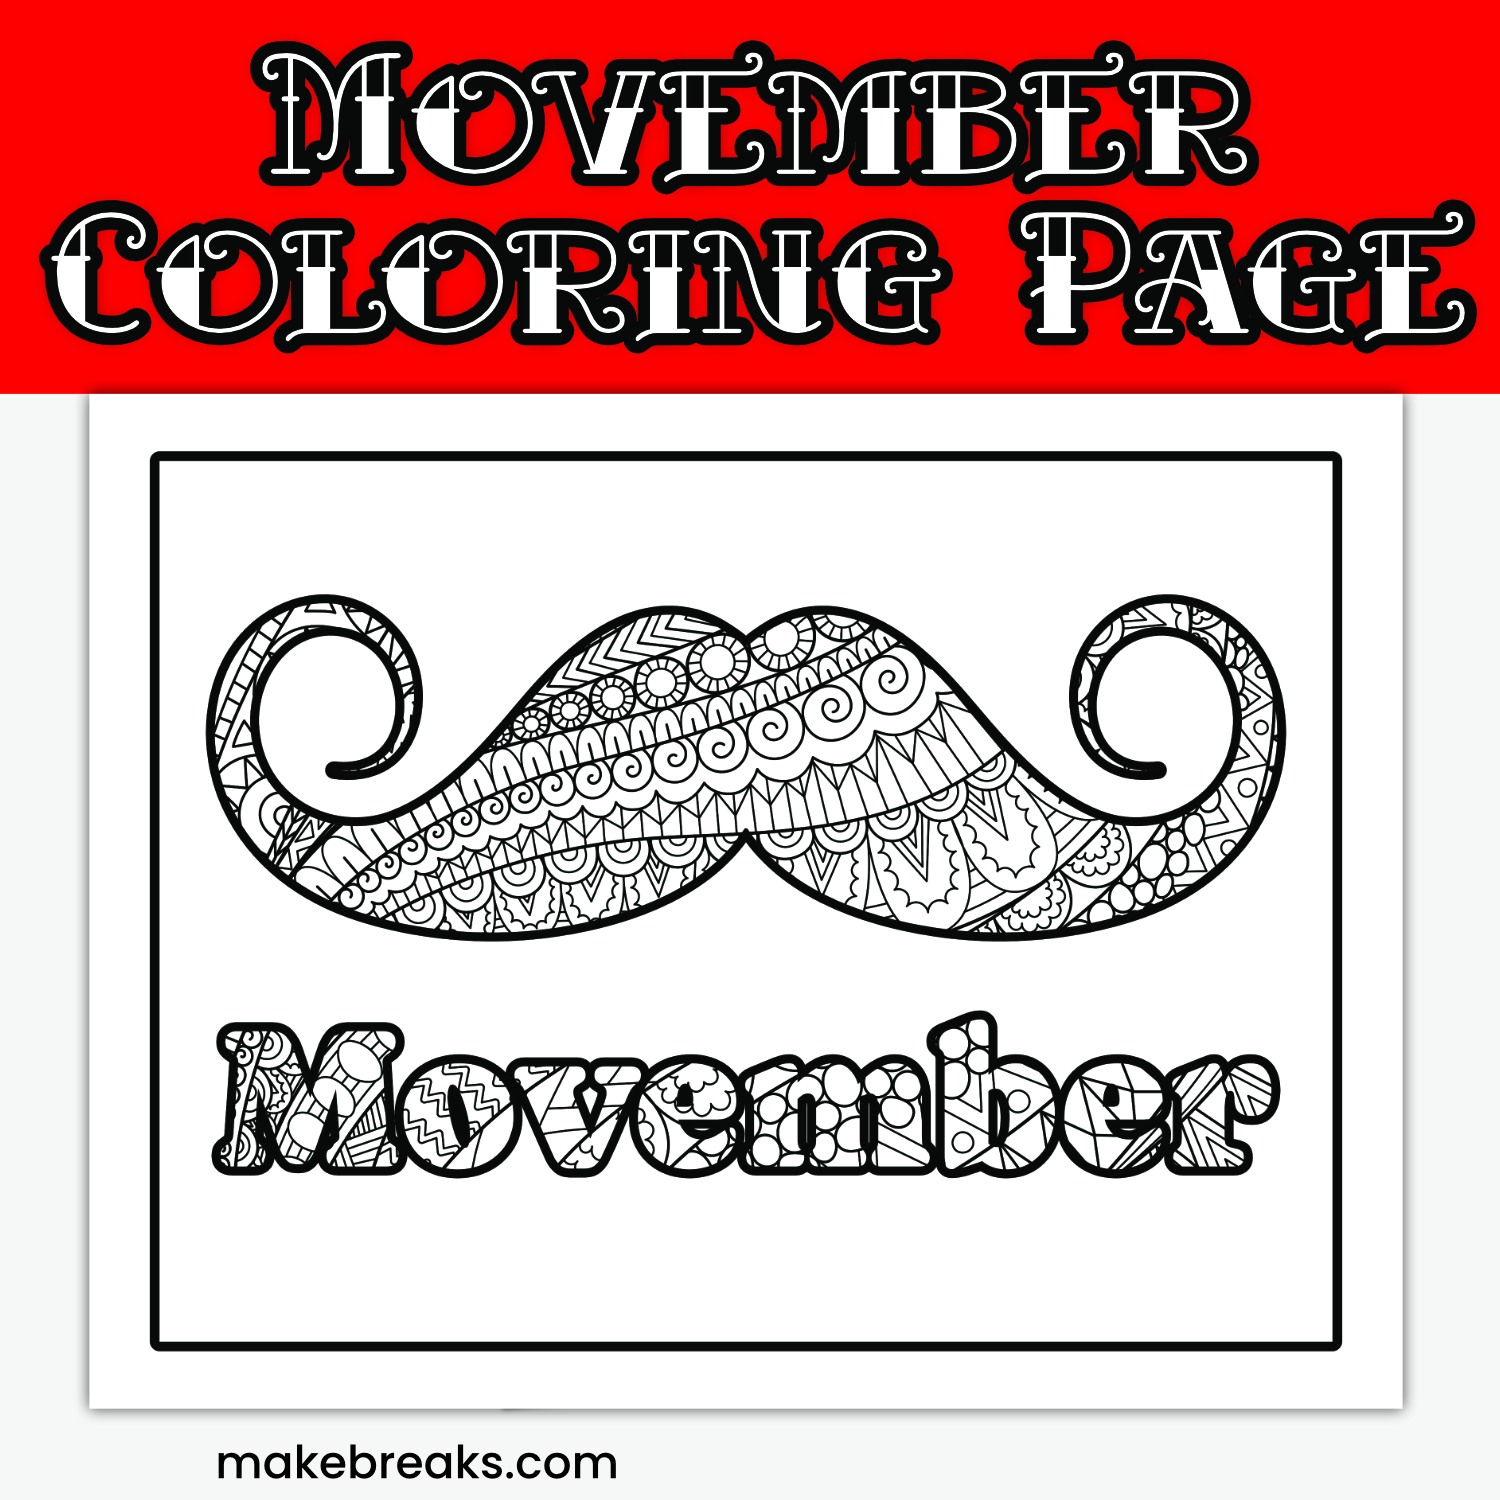 Free Movember Coloring Page – The Mo Is Calling